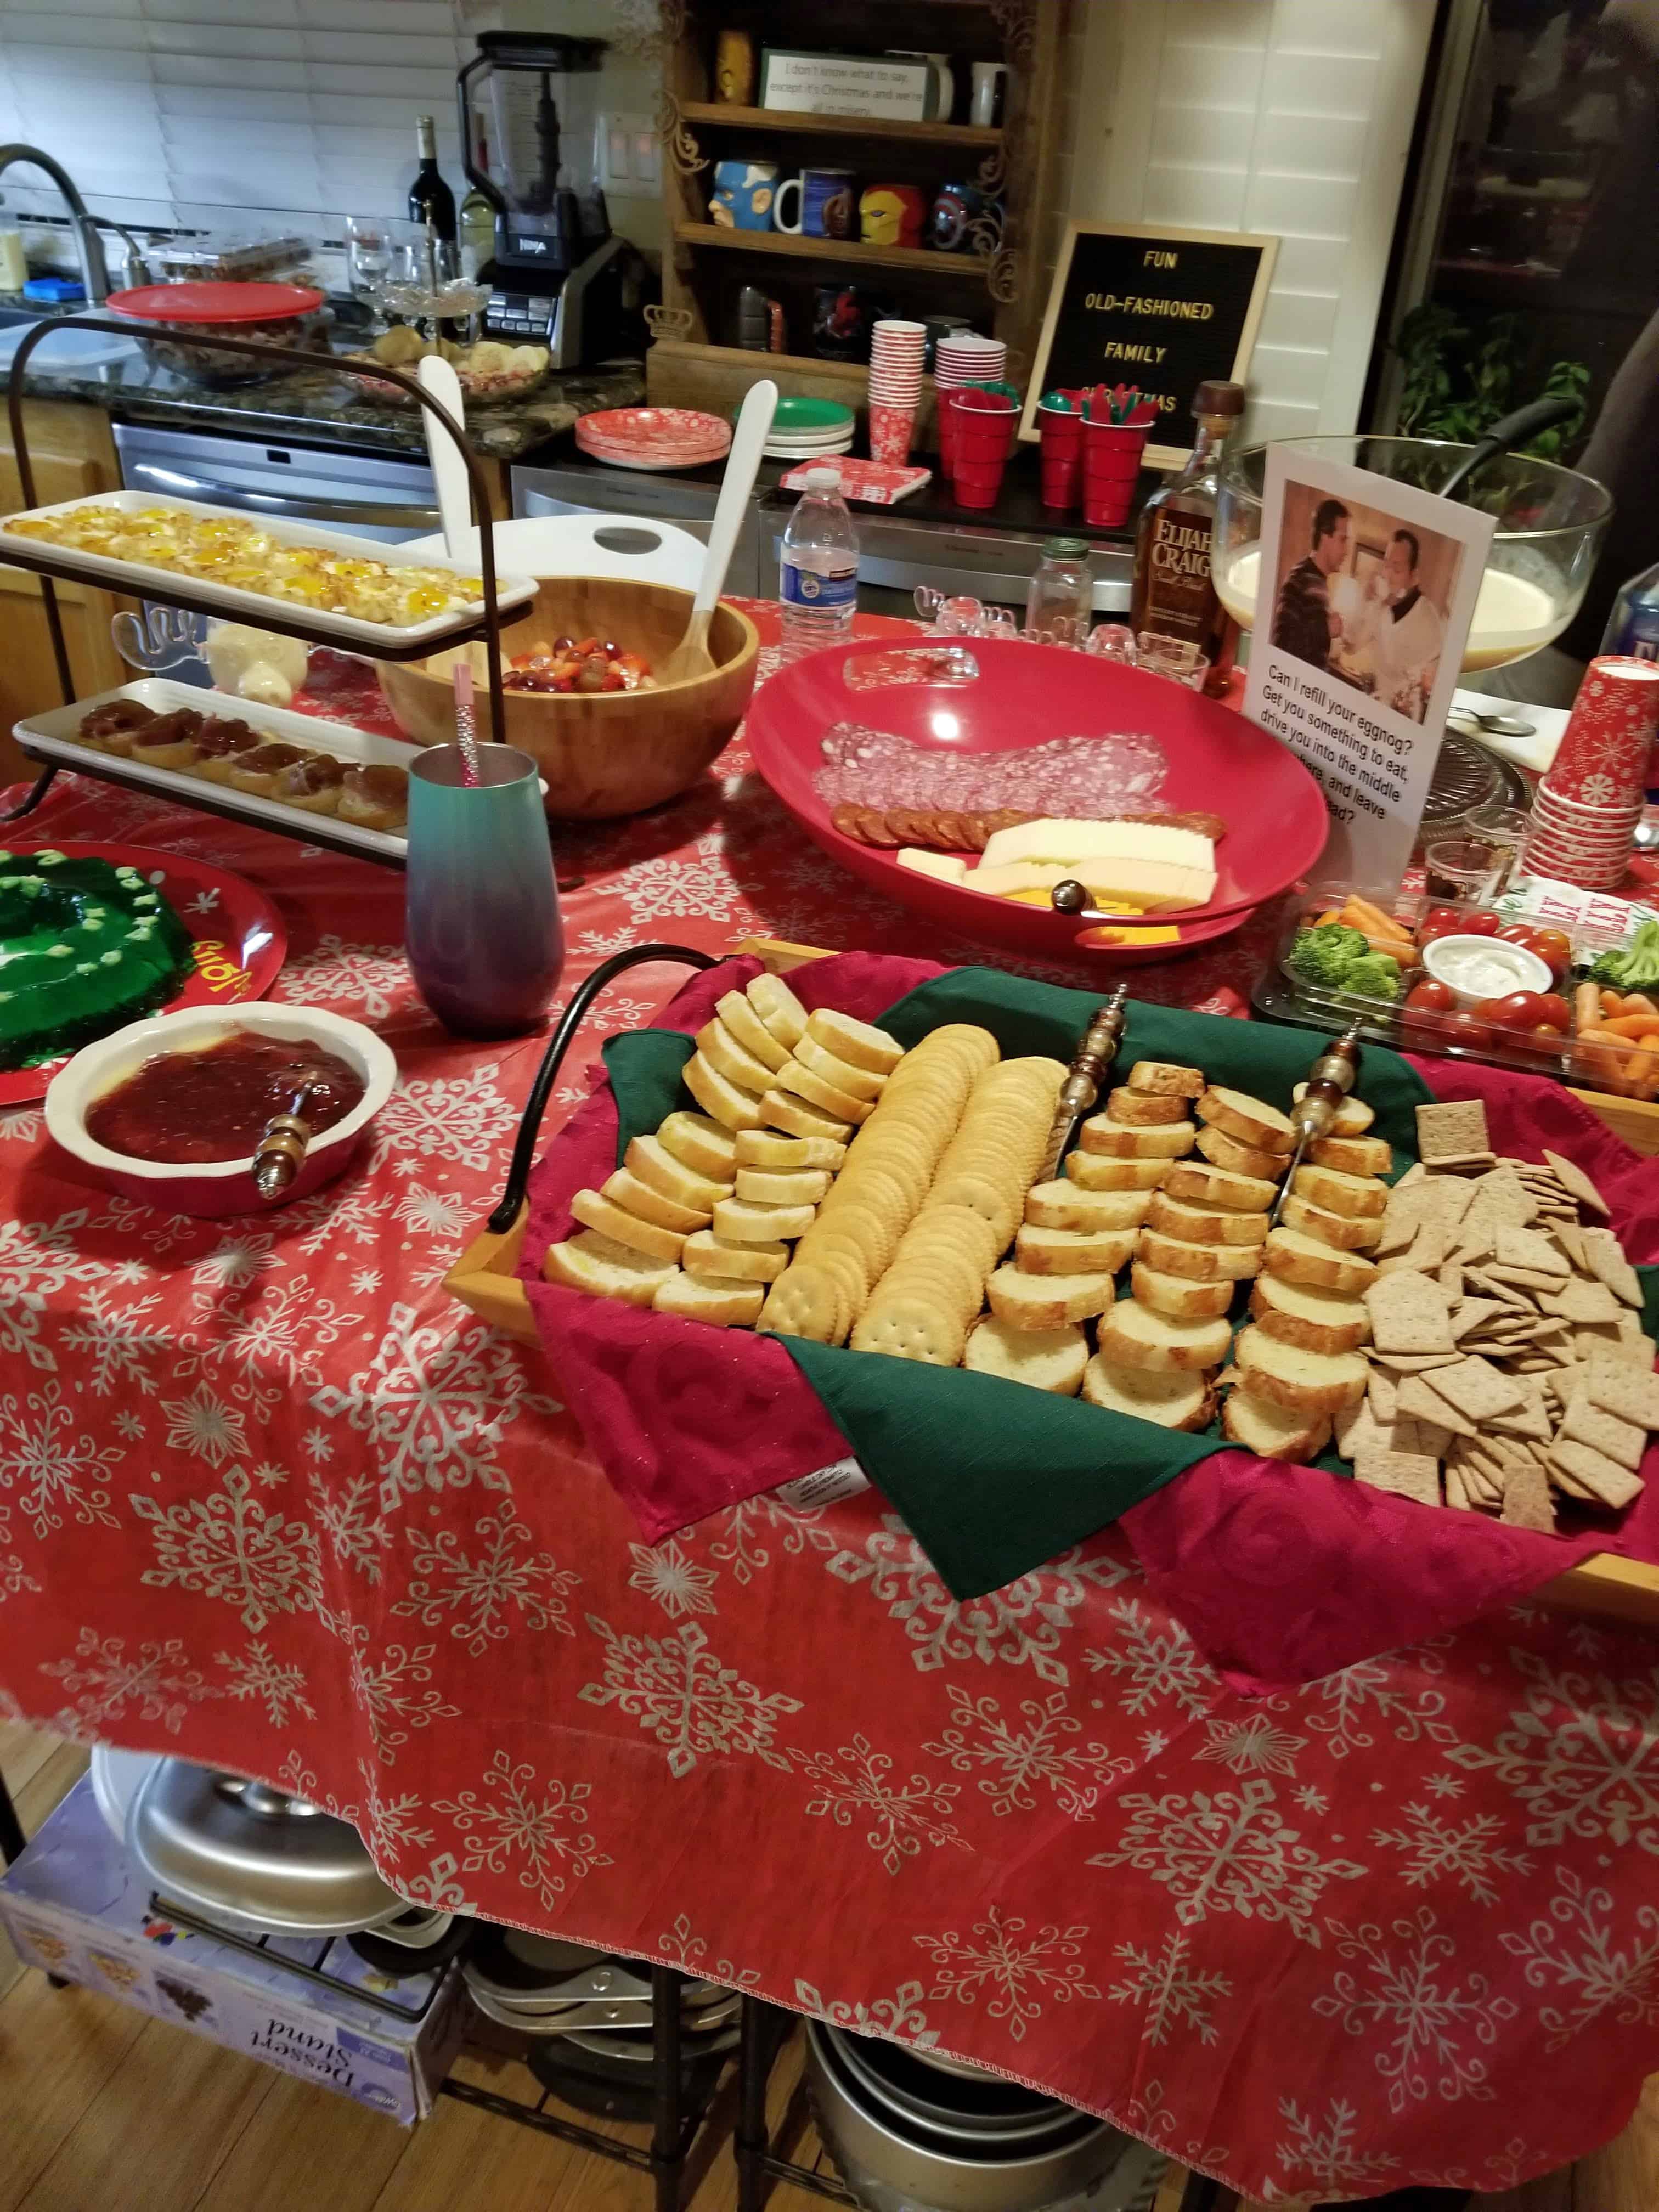 National Lampoon's Christmas Vacation Party - Food & Decorating Ideas!